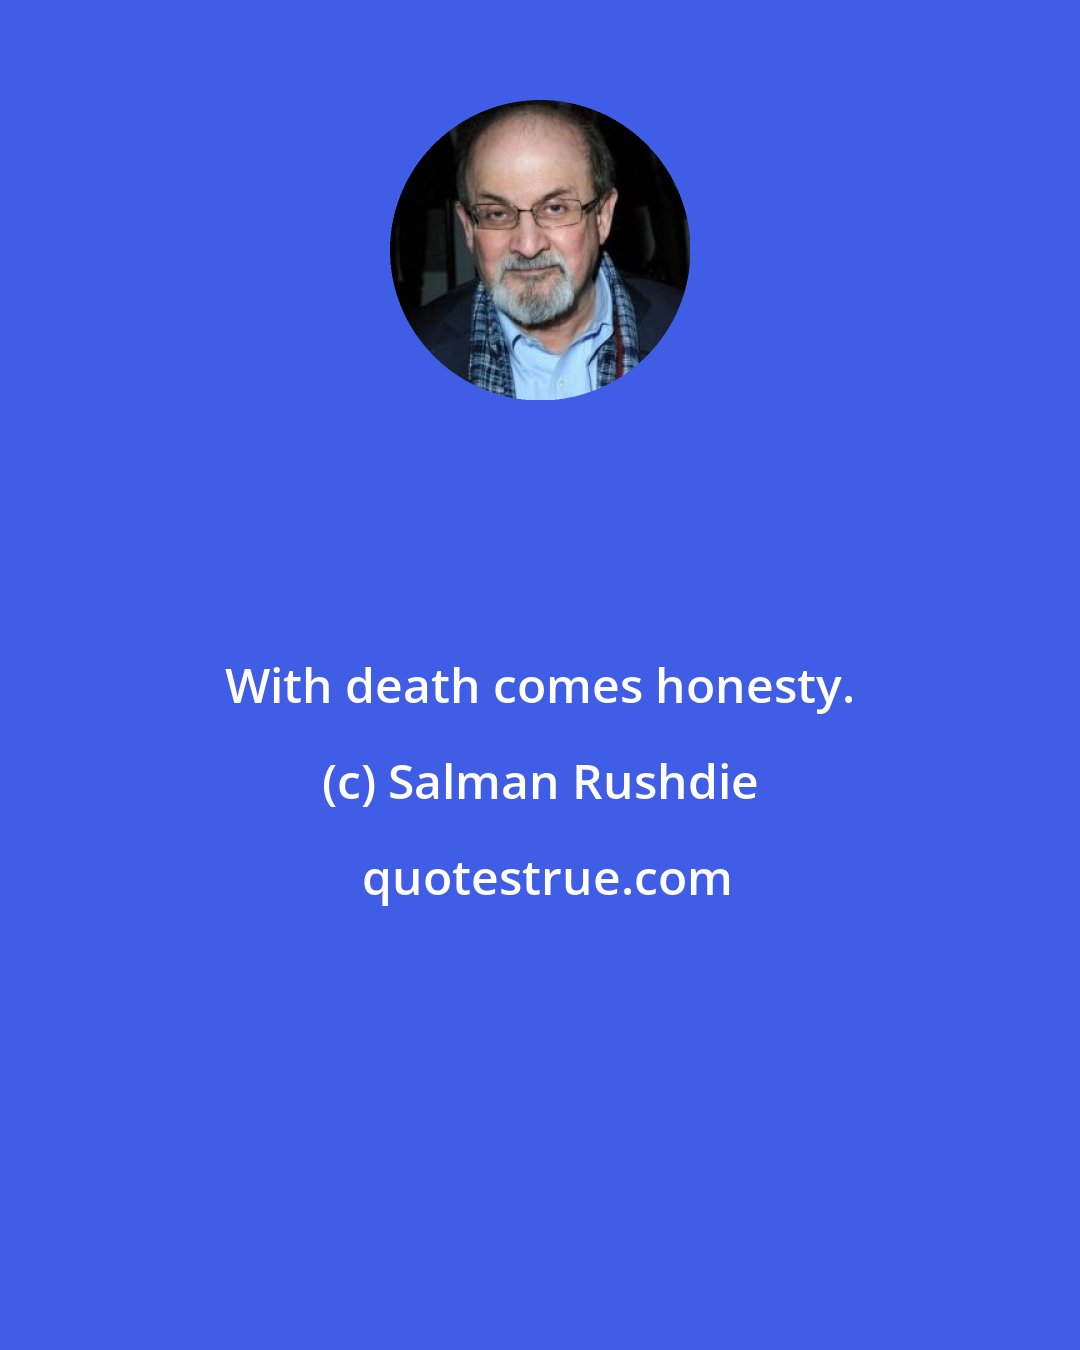 Salman Rushdie: With death comes honesty.